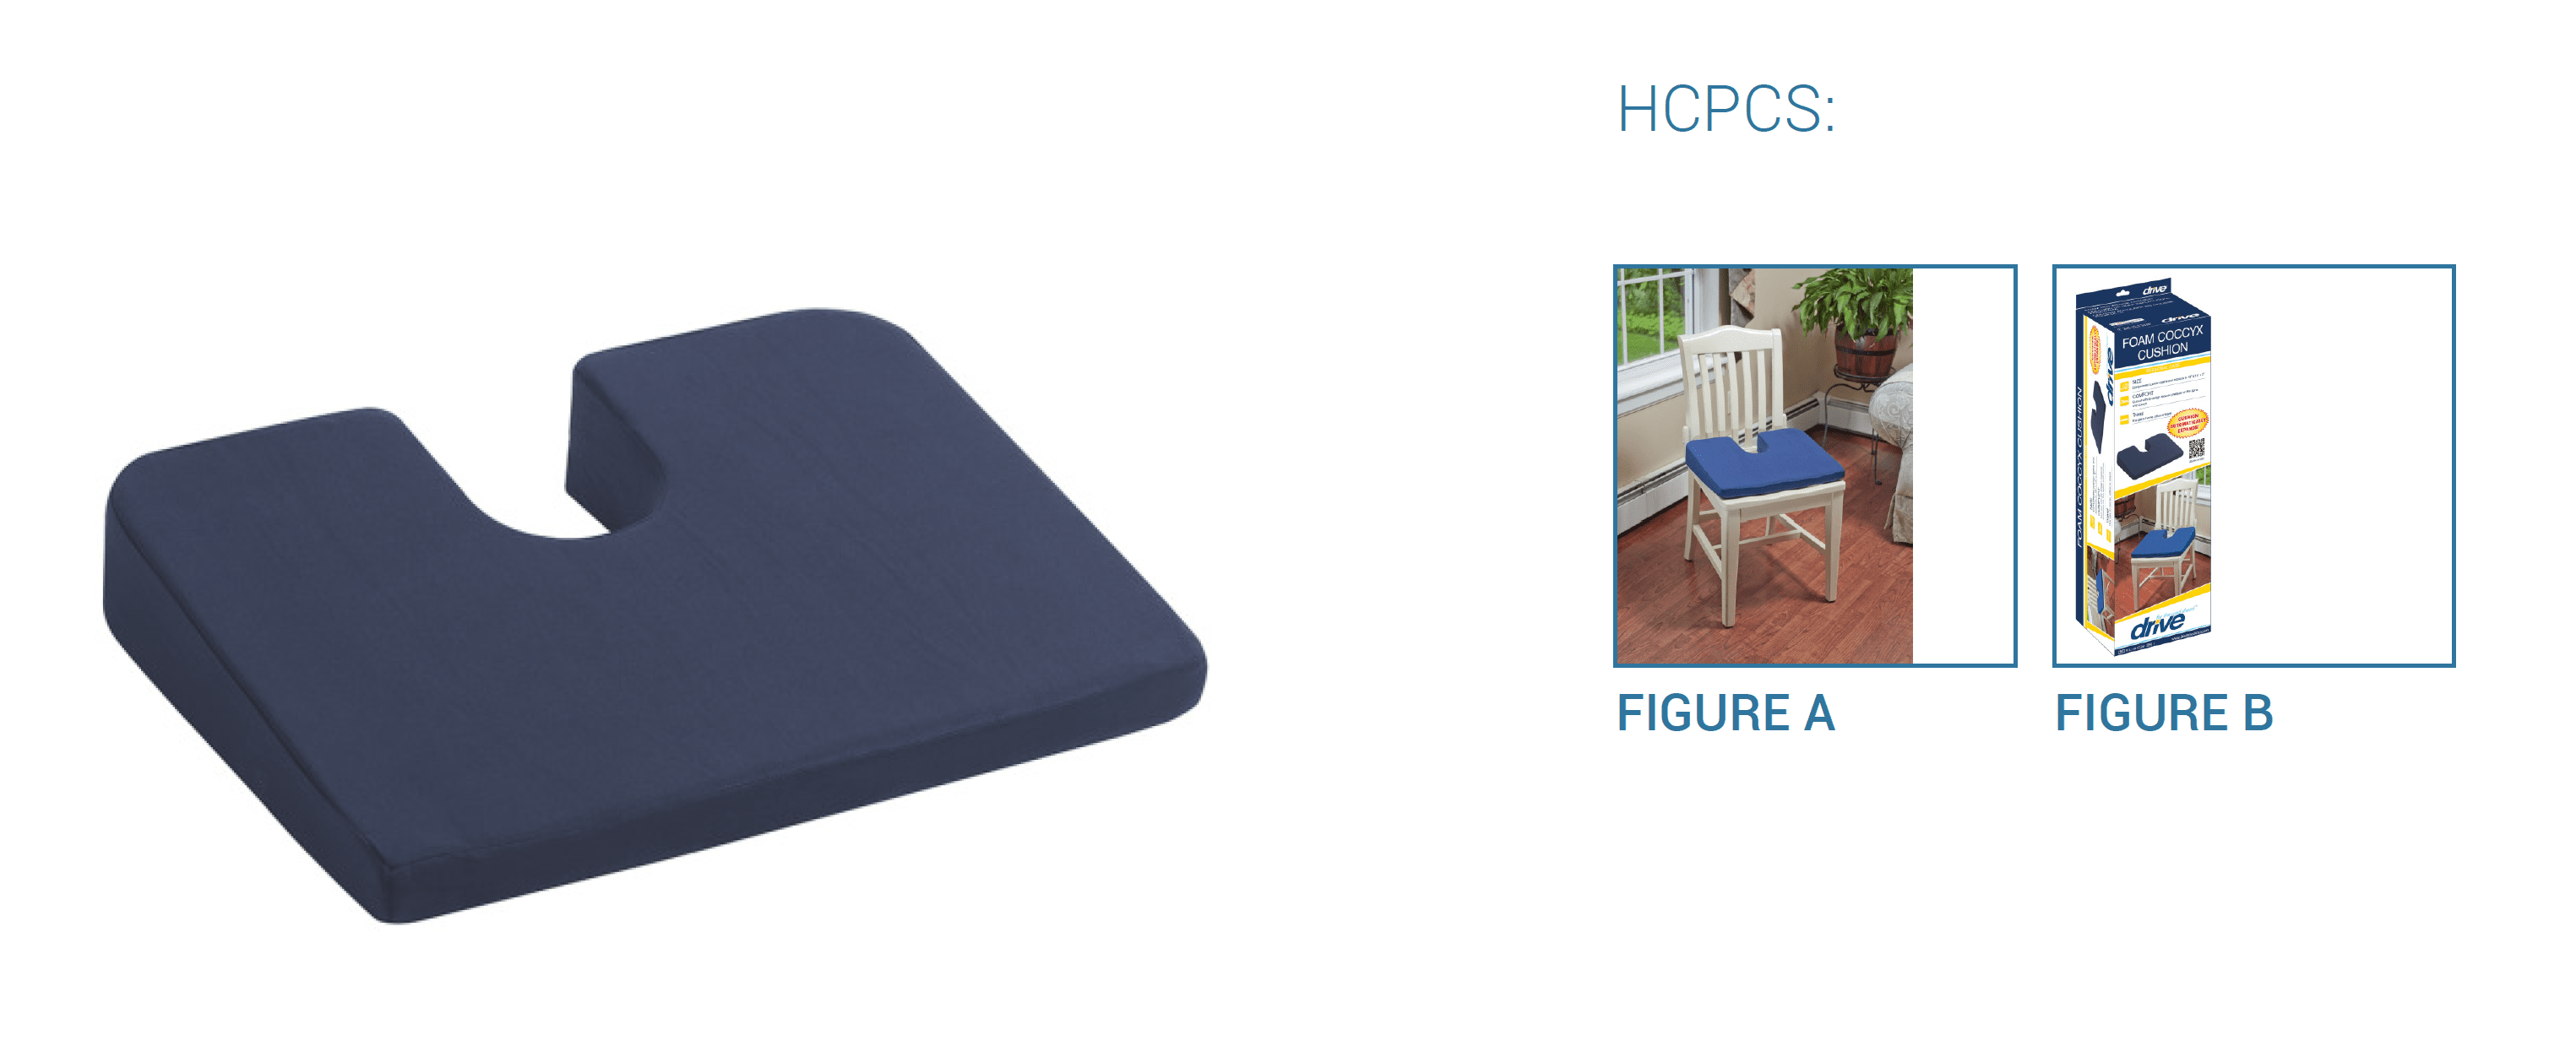 Compressed Coccyx Cushion: Help Inc. - Everyone is relying on you. You can rely on us.